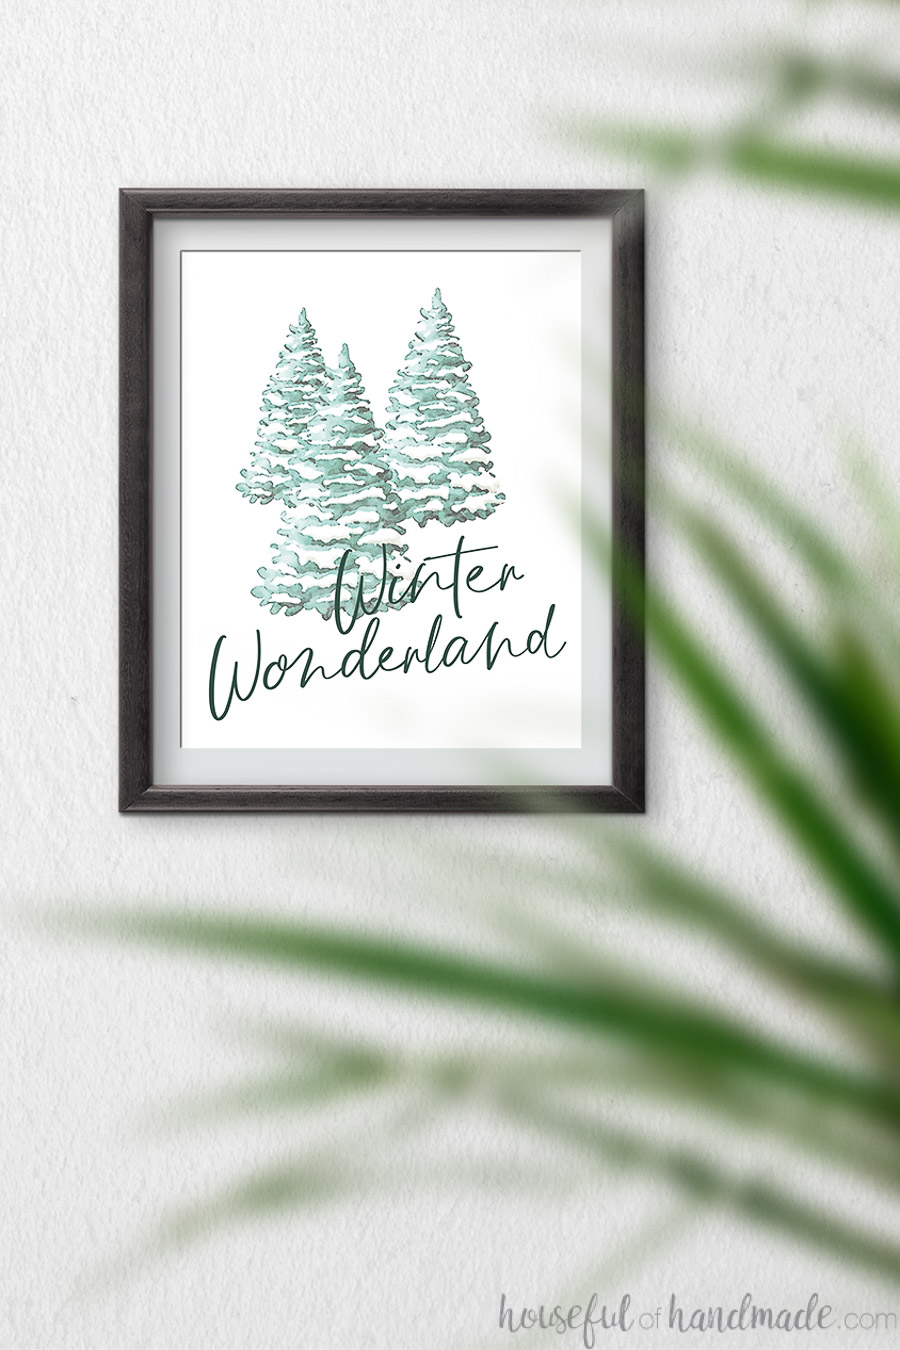 Watercolor Christmas printable with snow covered trees and script writing of Winter Wonderland on it, hanging on a wall.